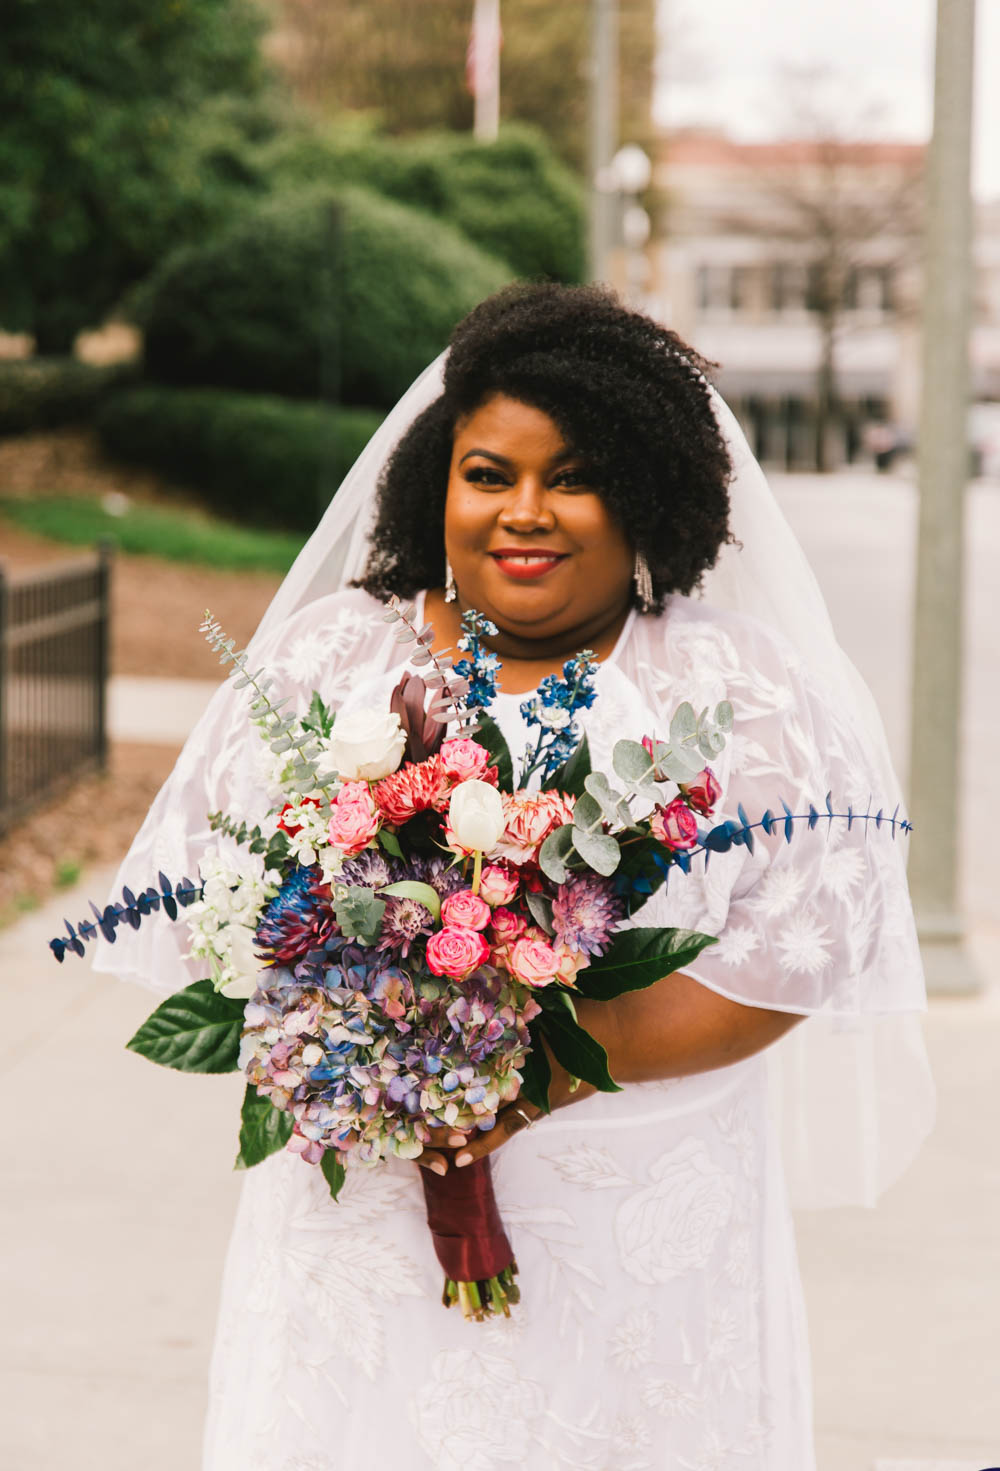 Lakesha and Nikia married during the coronavirus outbreak on March 20, 2020, in Decatur, Ga., but before the CDC shut down small gatherings.